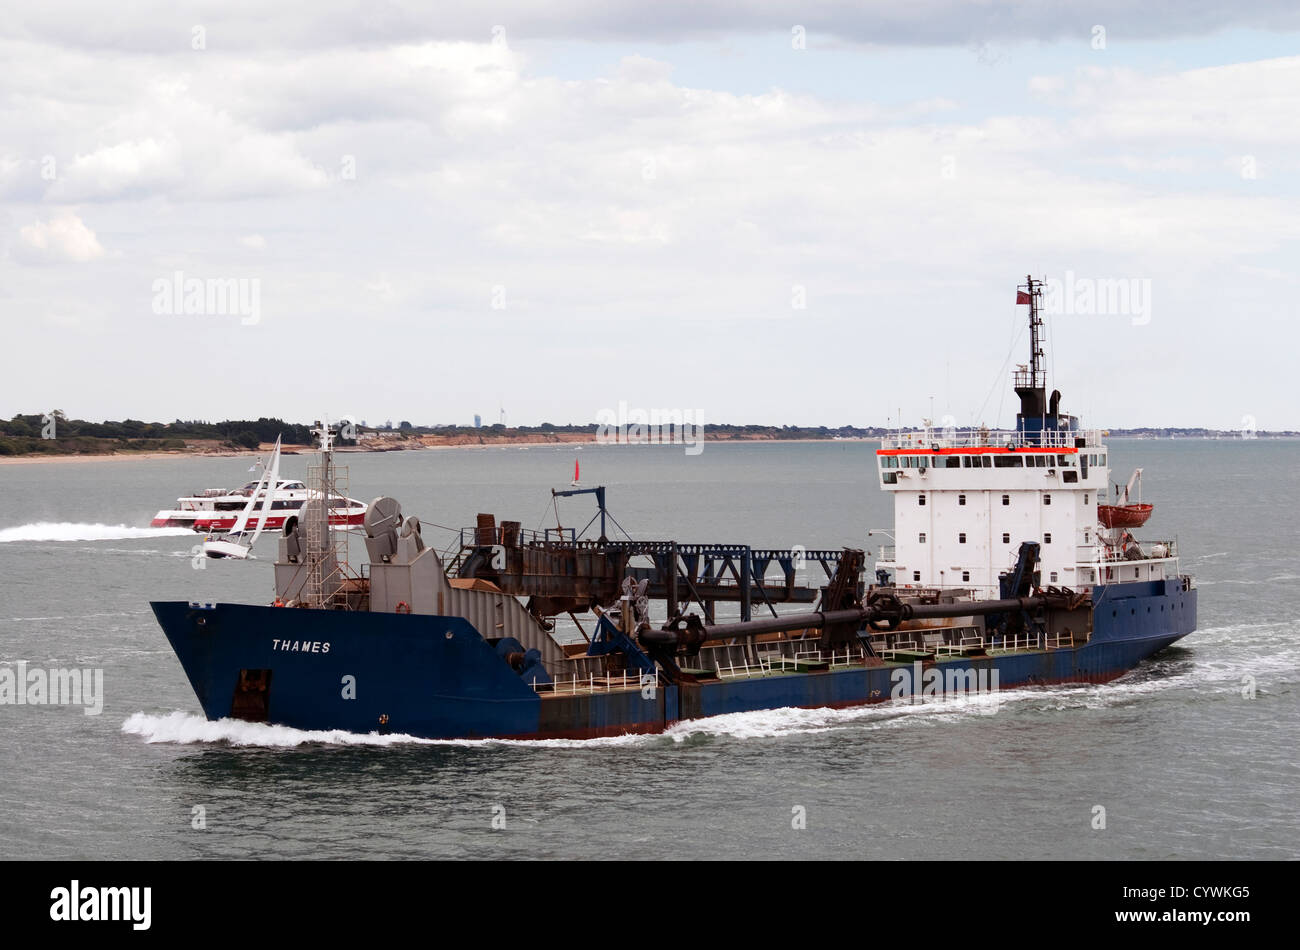 The oil tanker 'Thames' in the Solent off the south coast of England Stock Photo